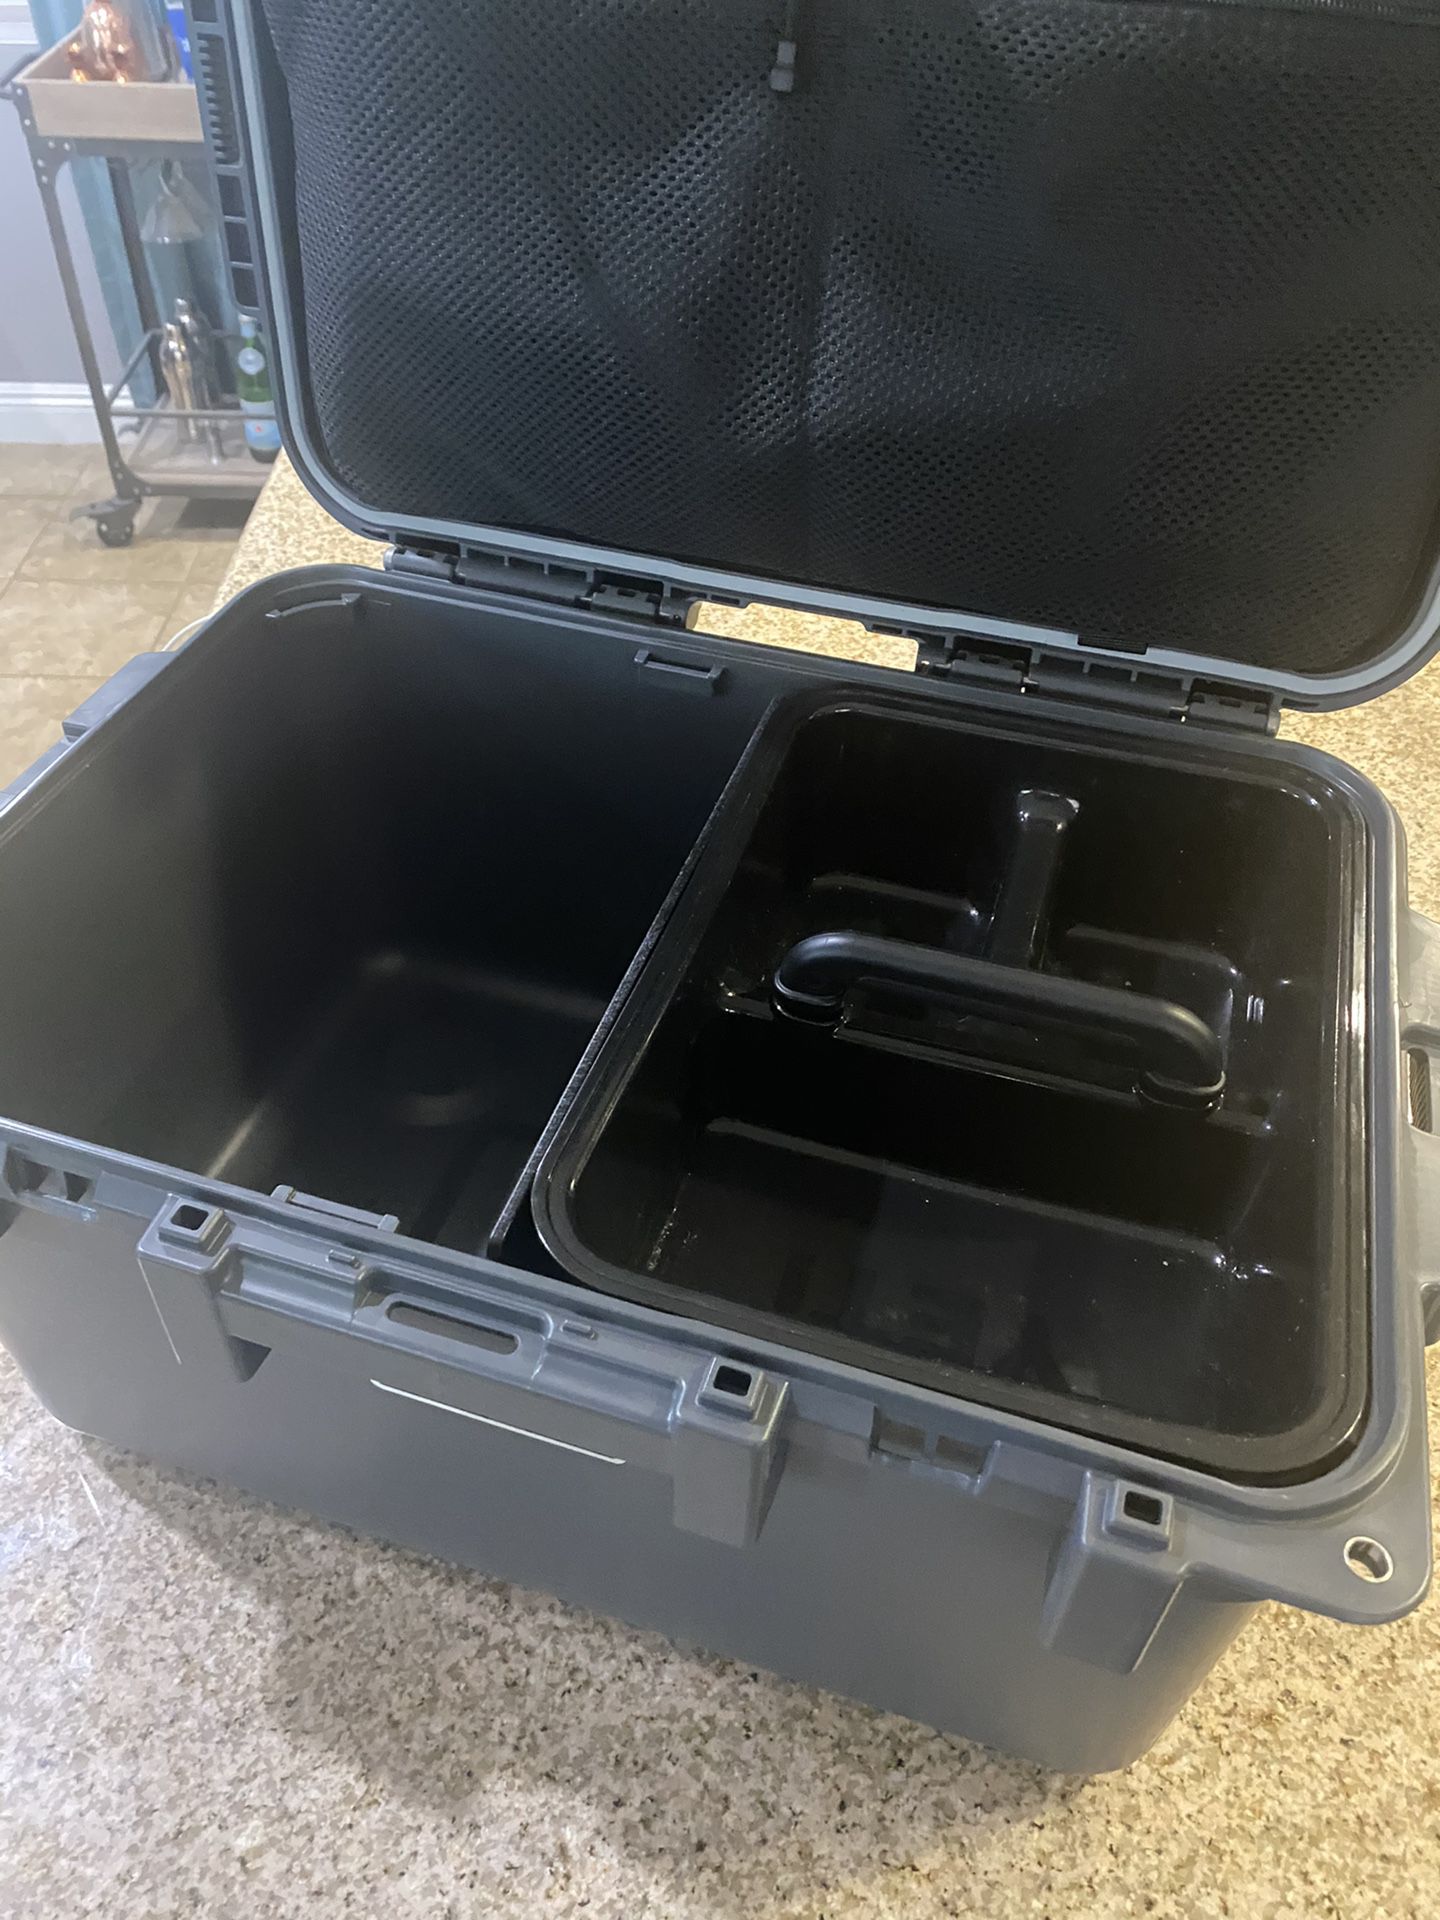 Yeti Loadout GoBox 15 brand new for Sale in Riverside, CA - OfferUp